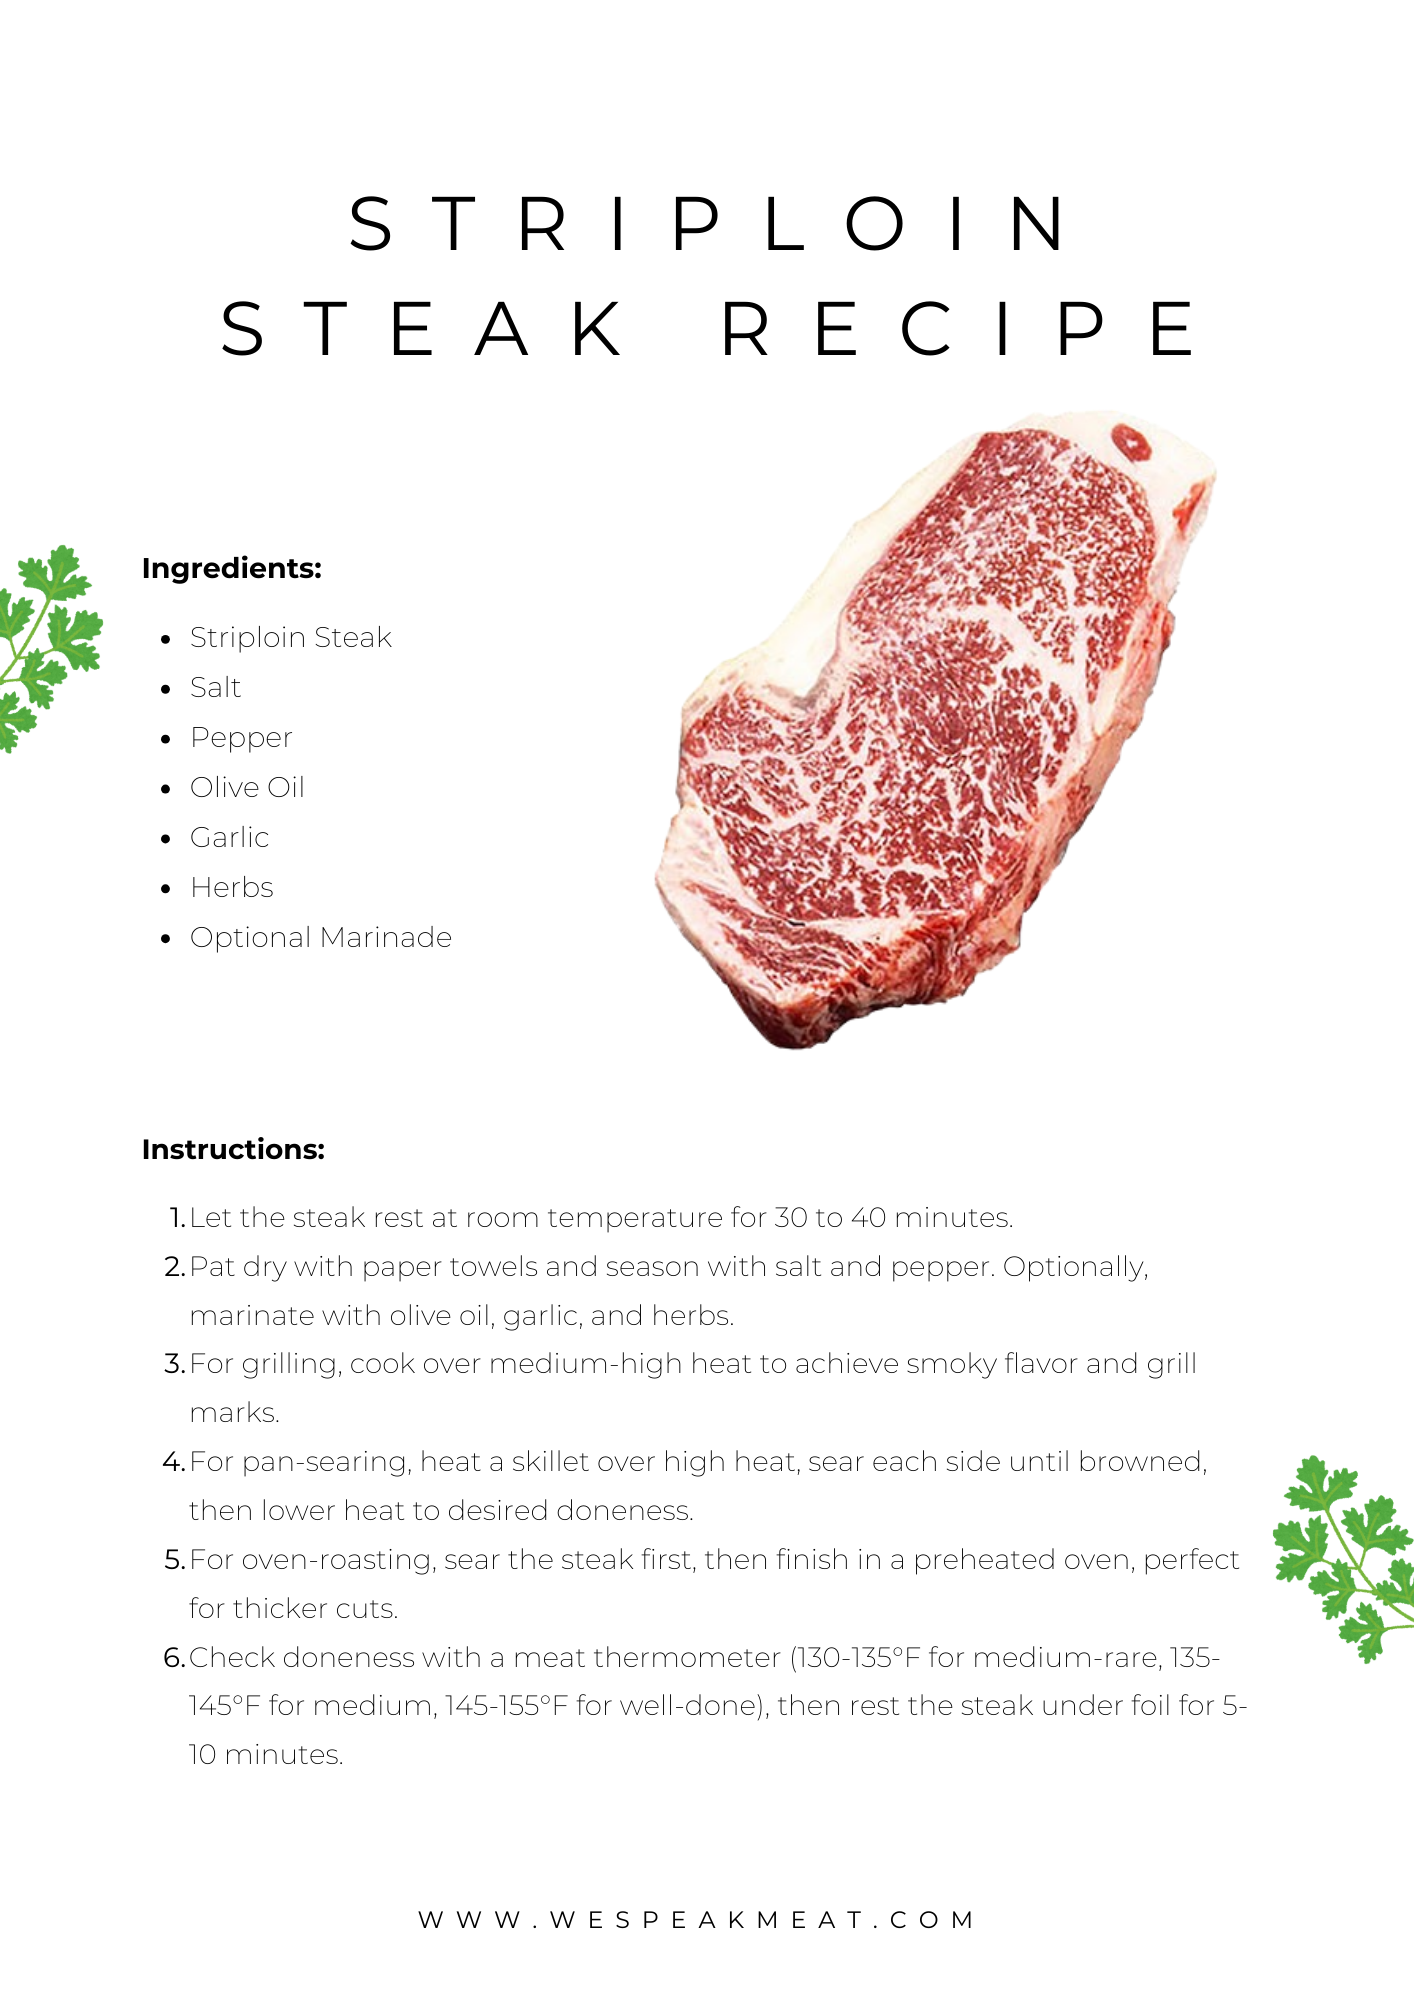 Easy 3 Step Guide: Striploin Steak Recipe Instructions with Ingredients List and Cooking Tips.